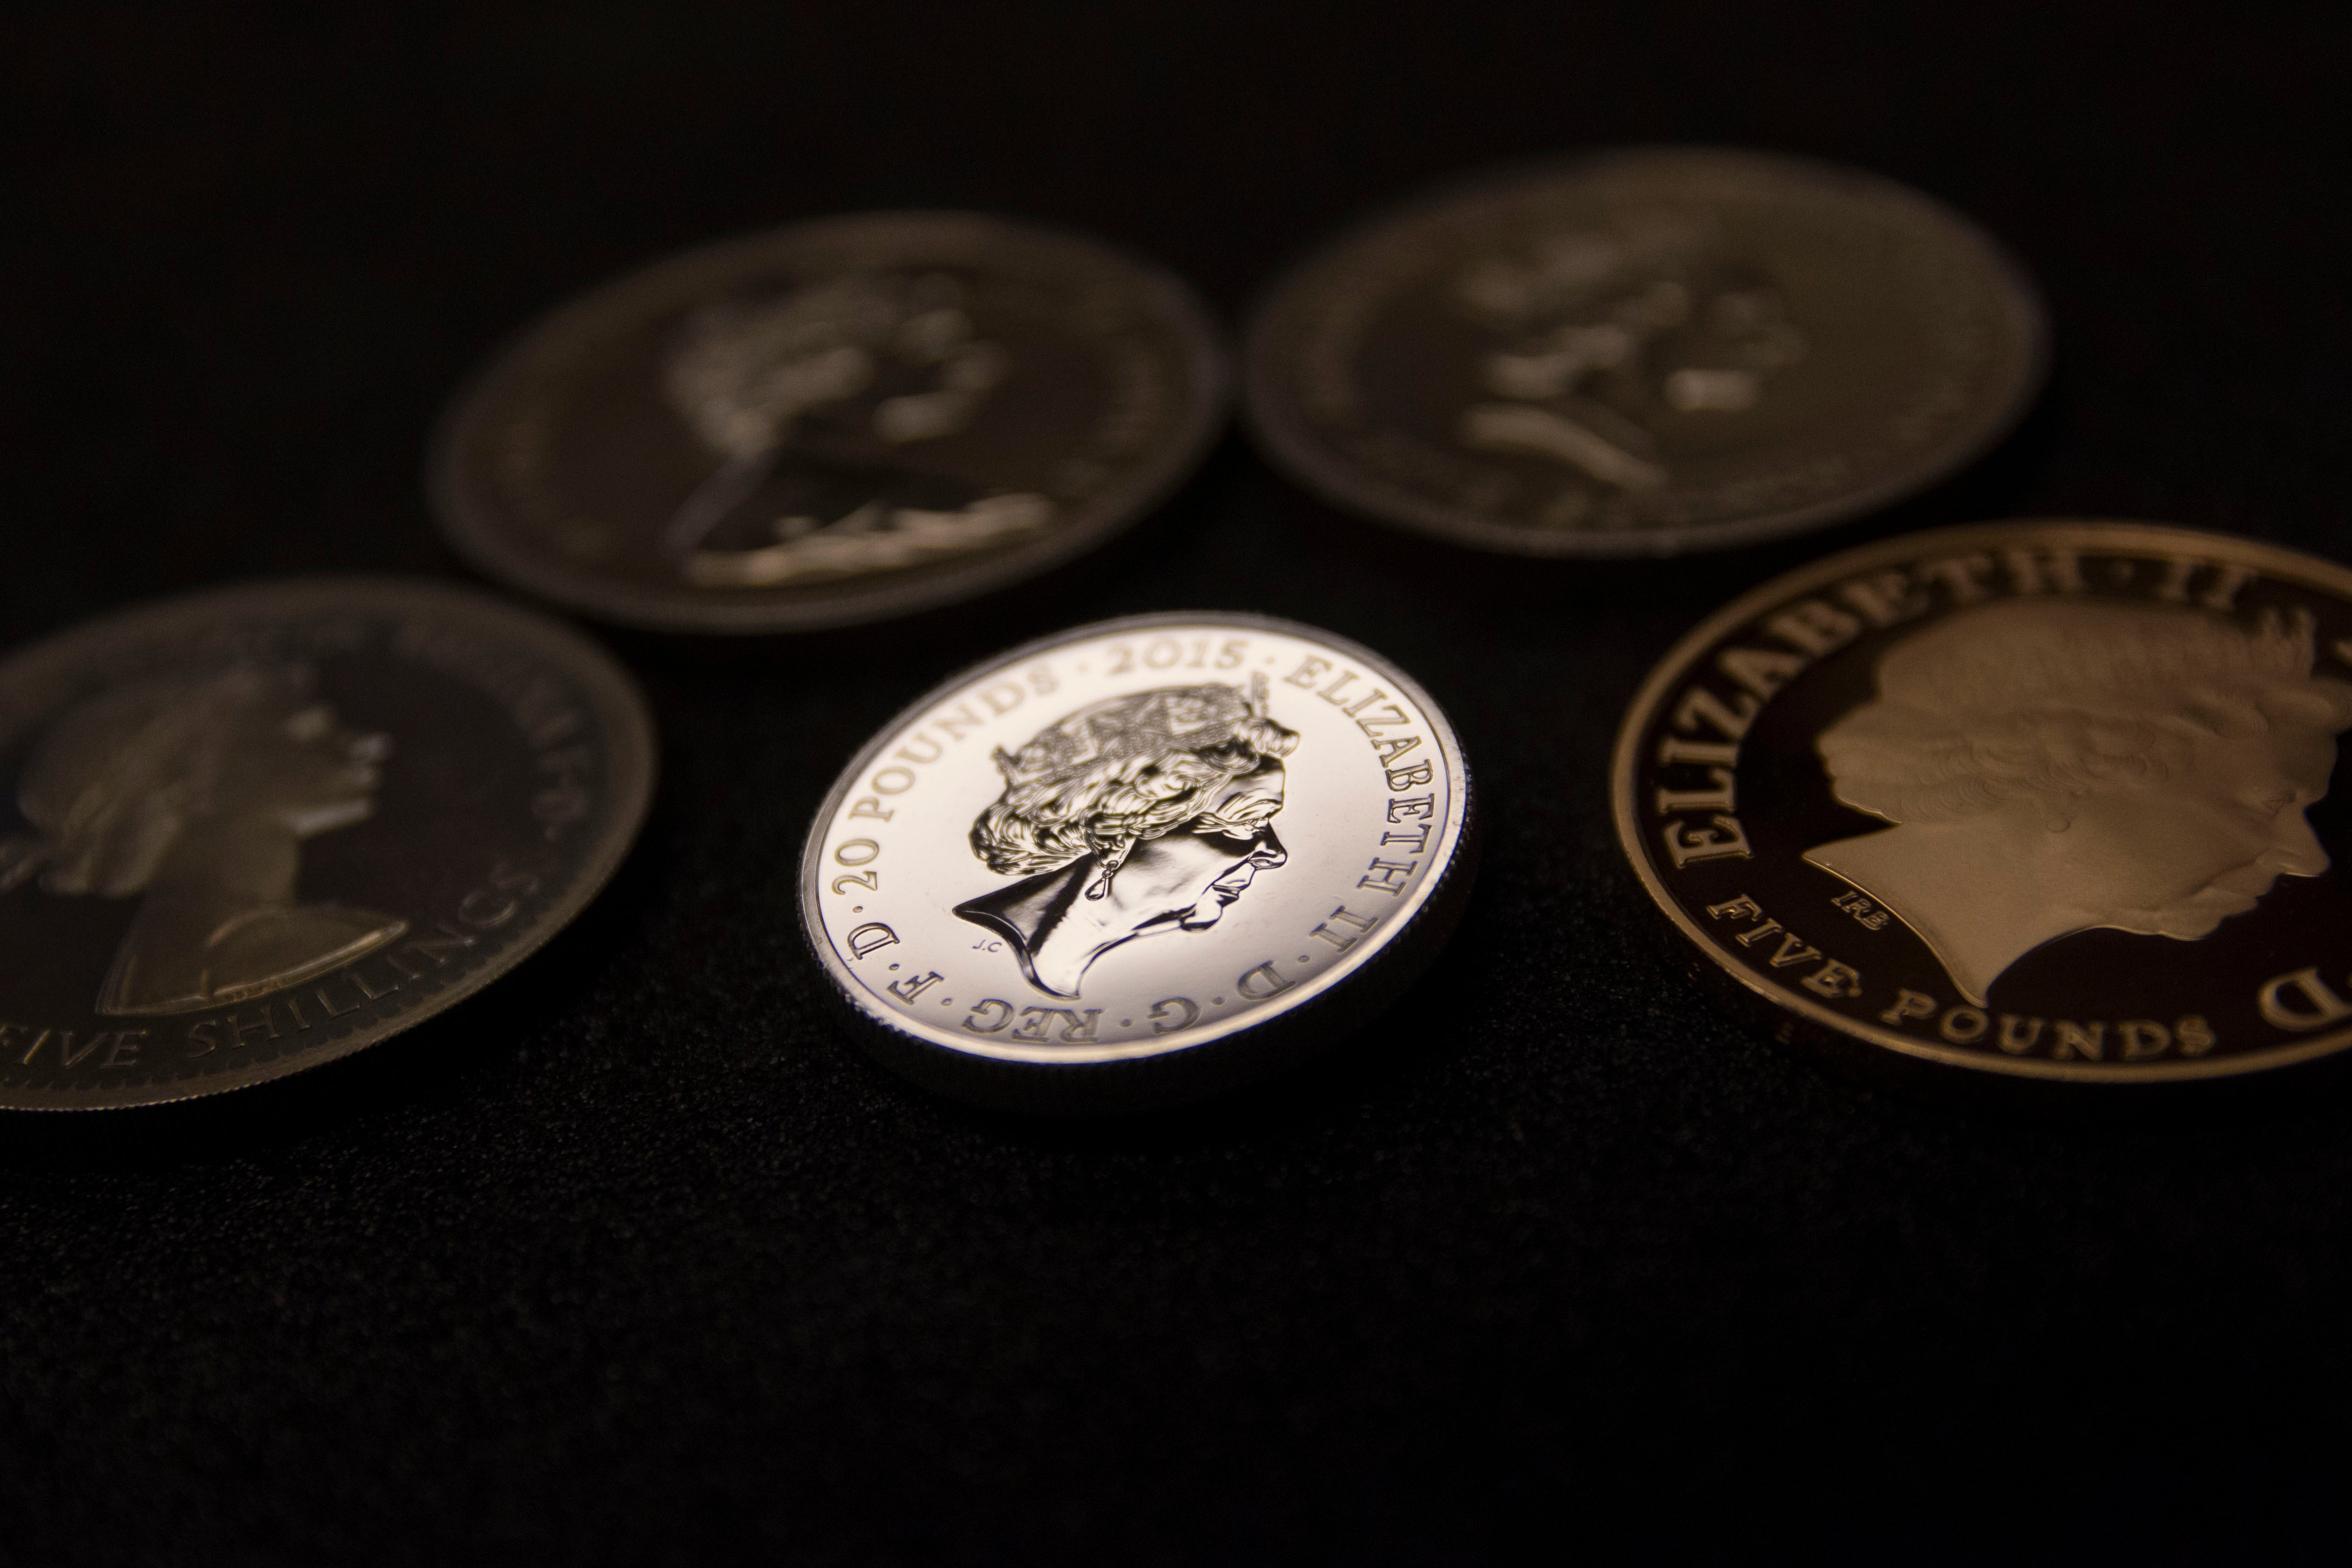 Coins are one of the many iconic aspects of British life that will change